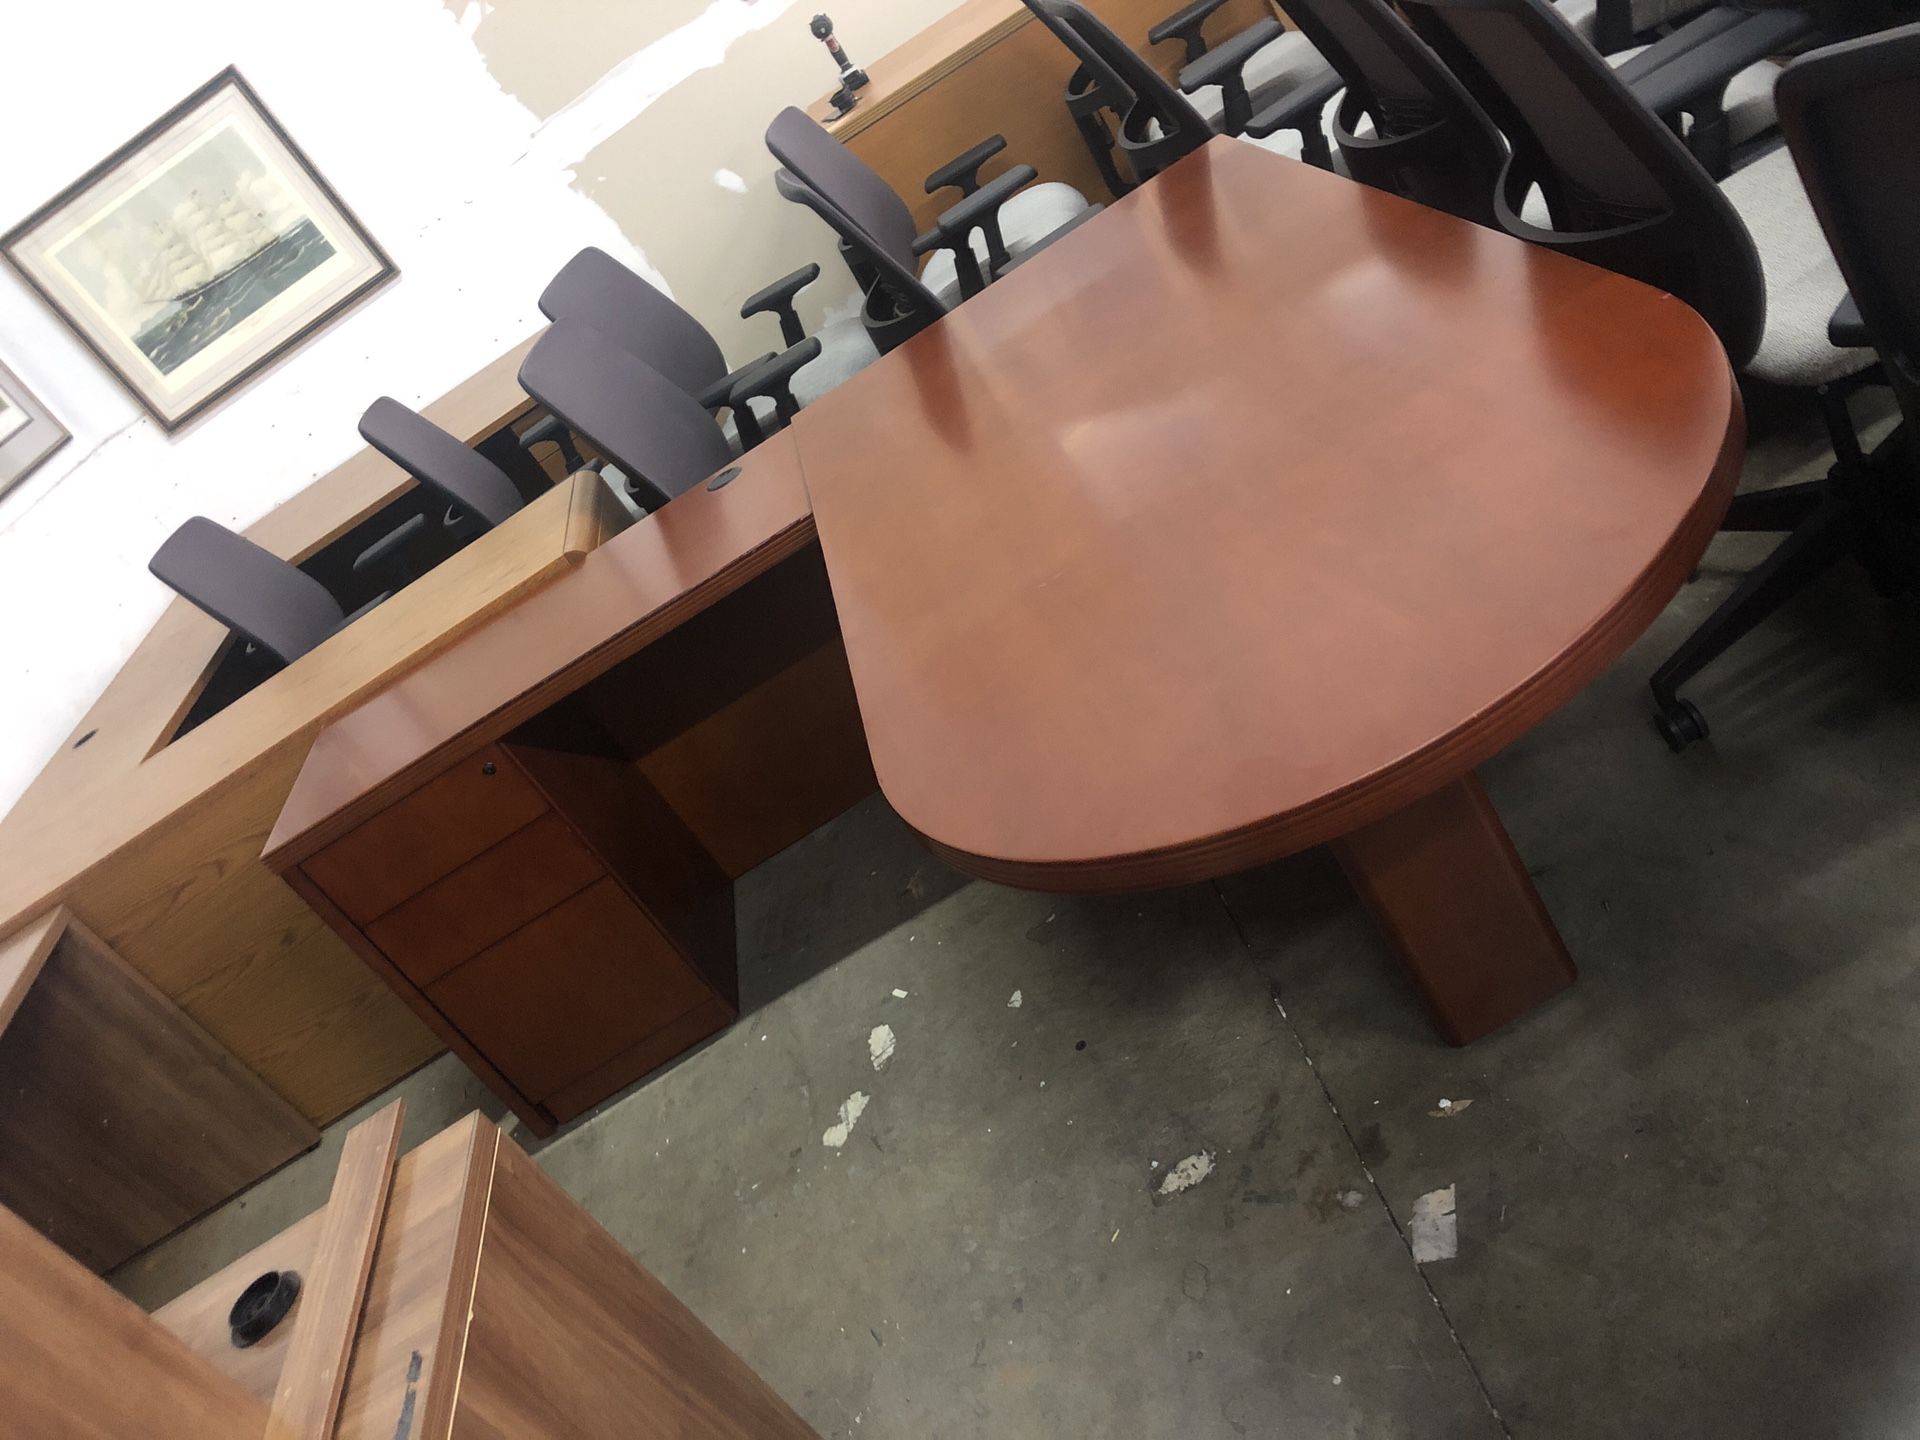 Used and new office furniture. Delivery available